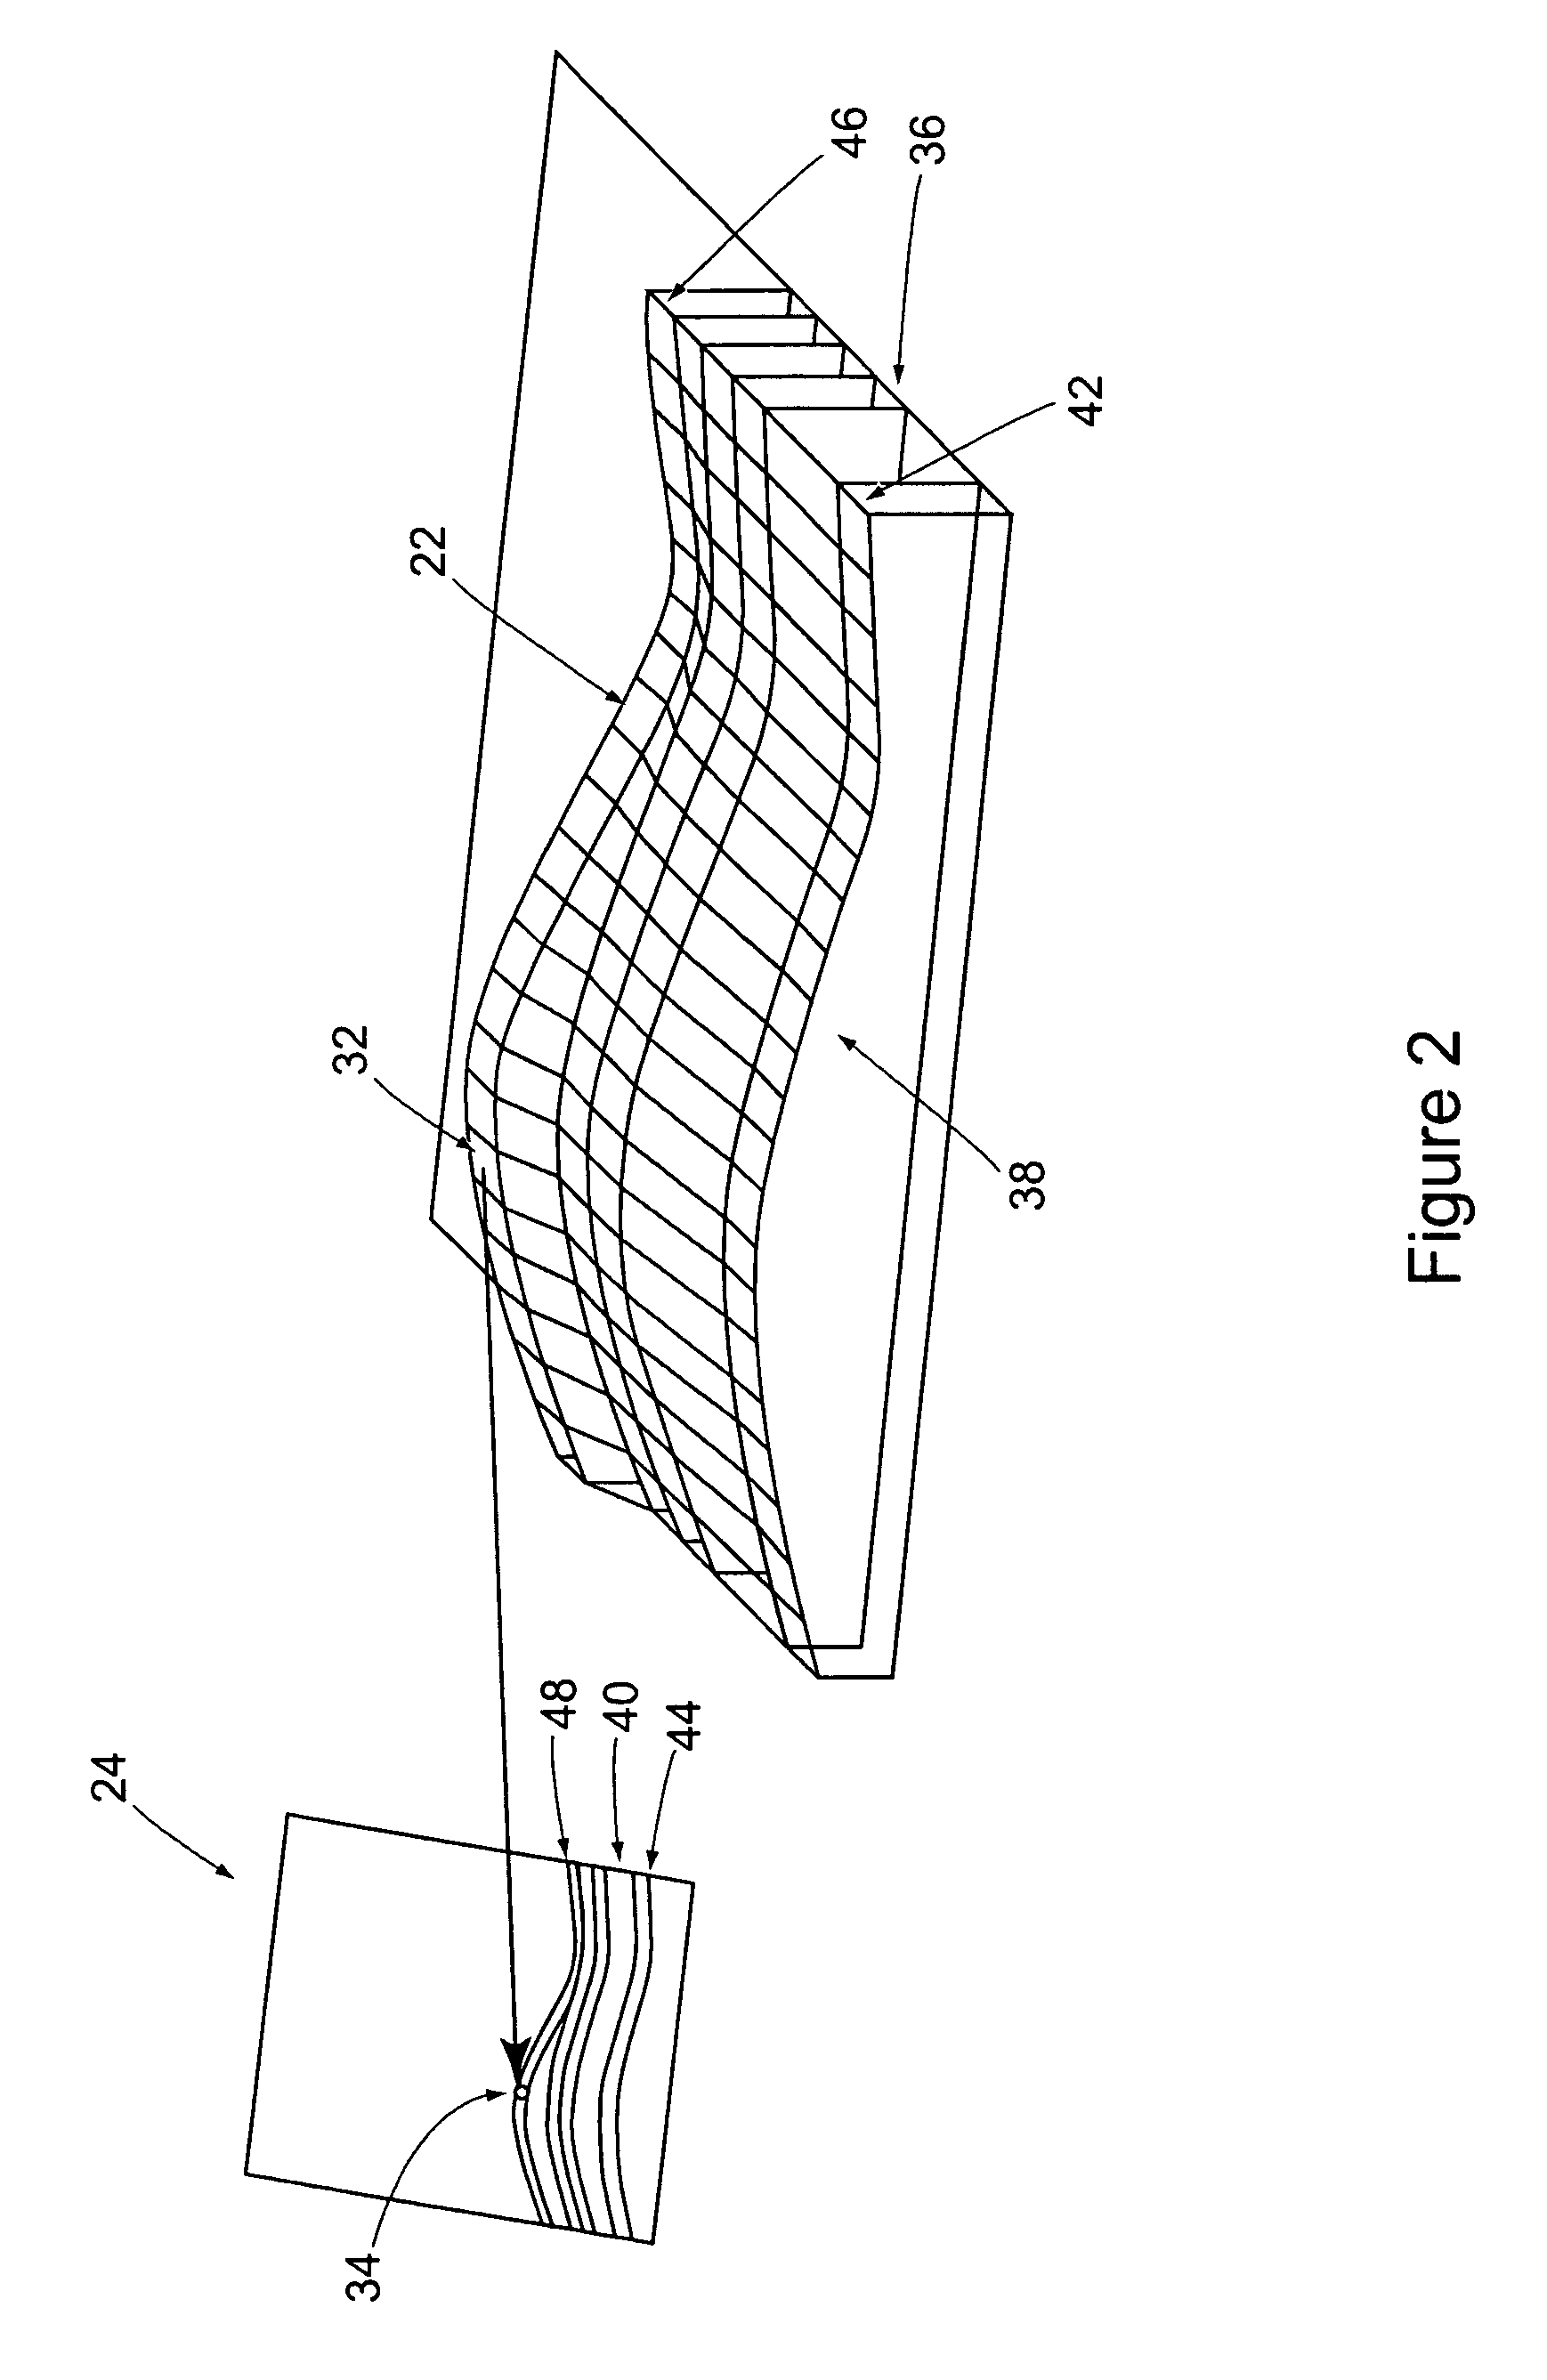 Method for analyzing geographic location and elevation data and geocoding an image with the data